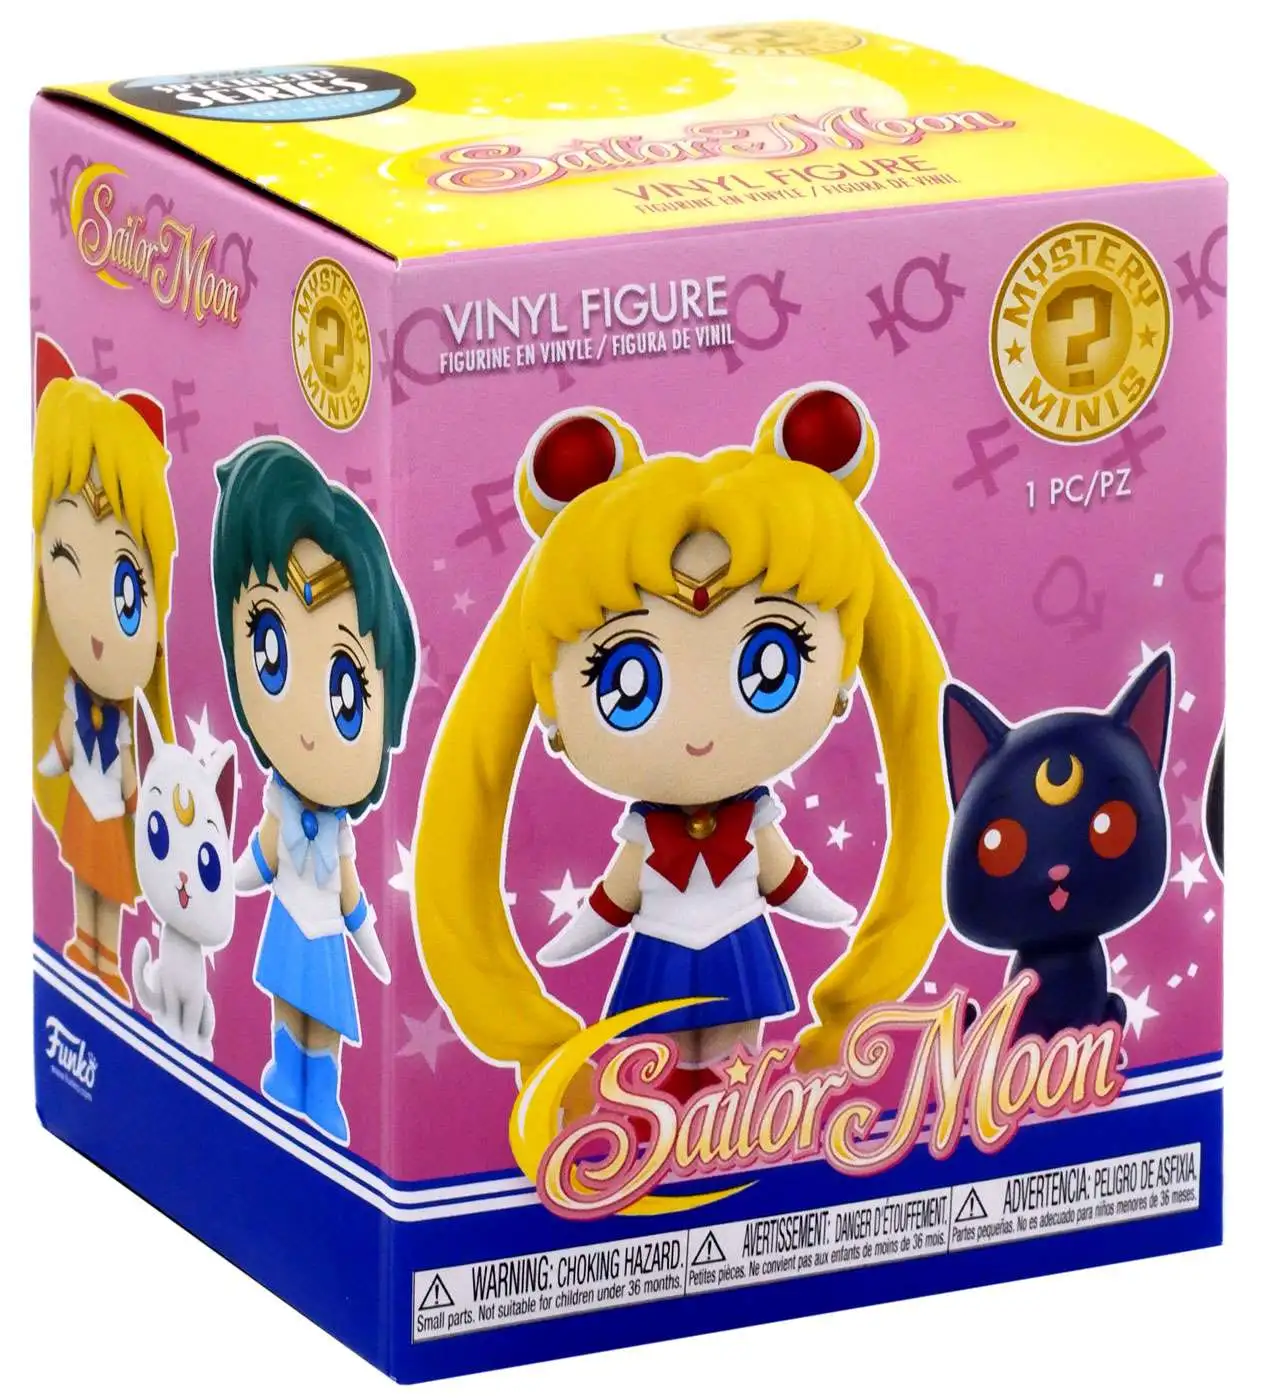 Sailor Moon FIGURES CHOOSE YOURS! FUNKO Mystery Minis Series 